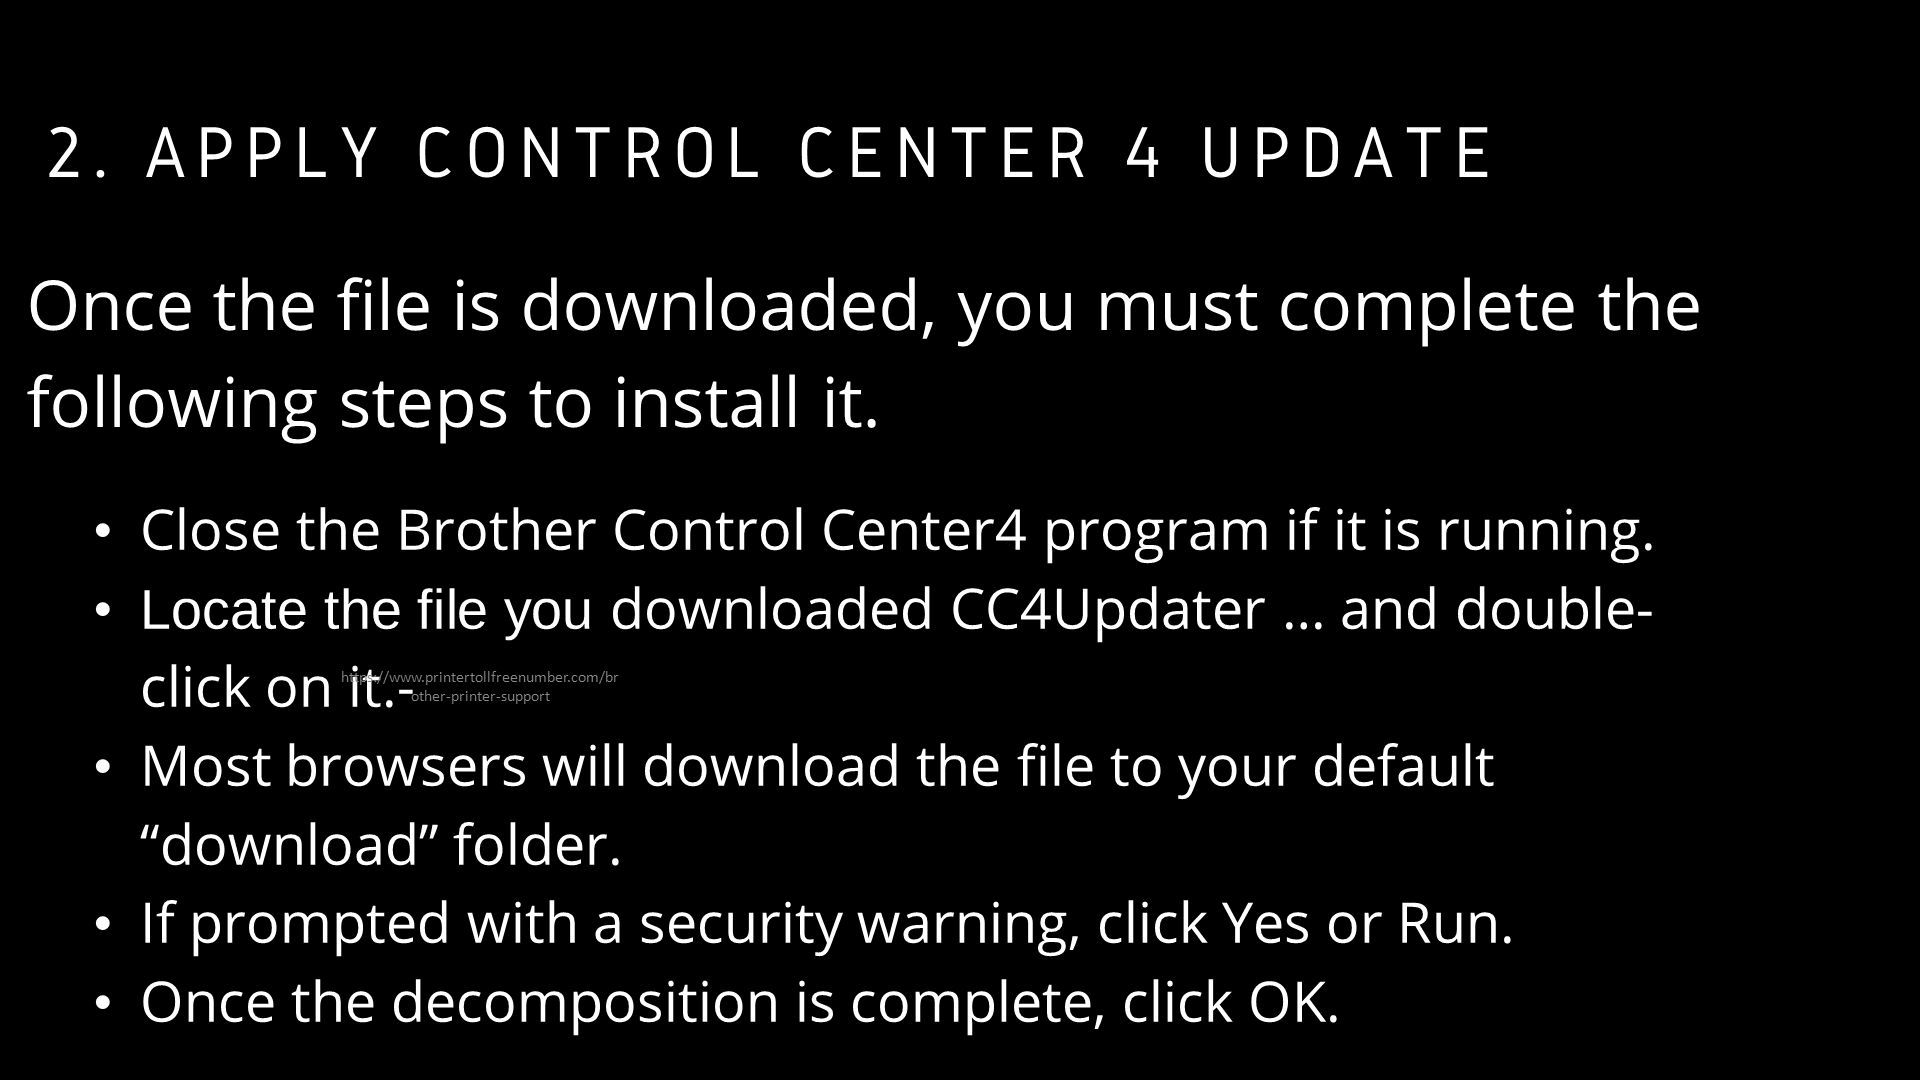 How to download and install Brother Control Center 4 update Toll Free  other-printer-support. - ppt download